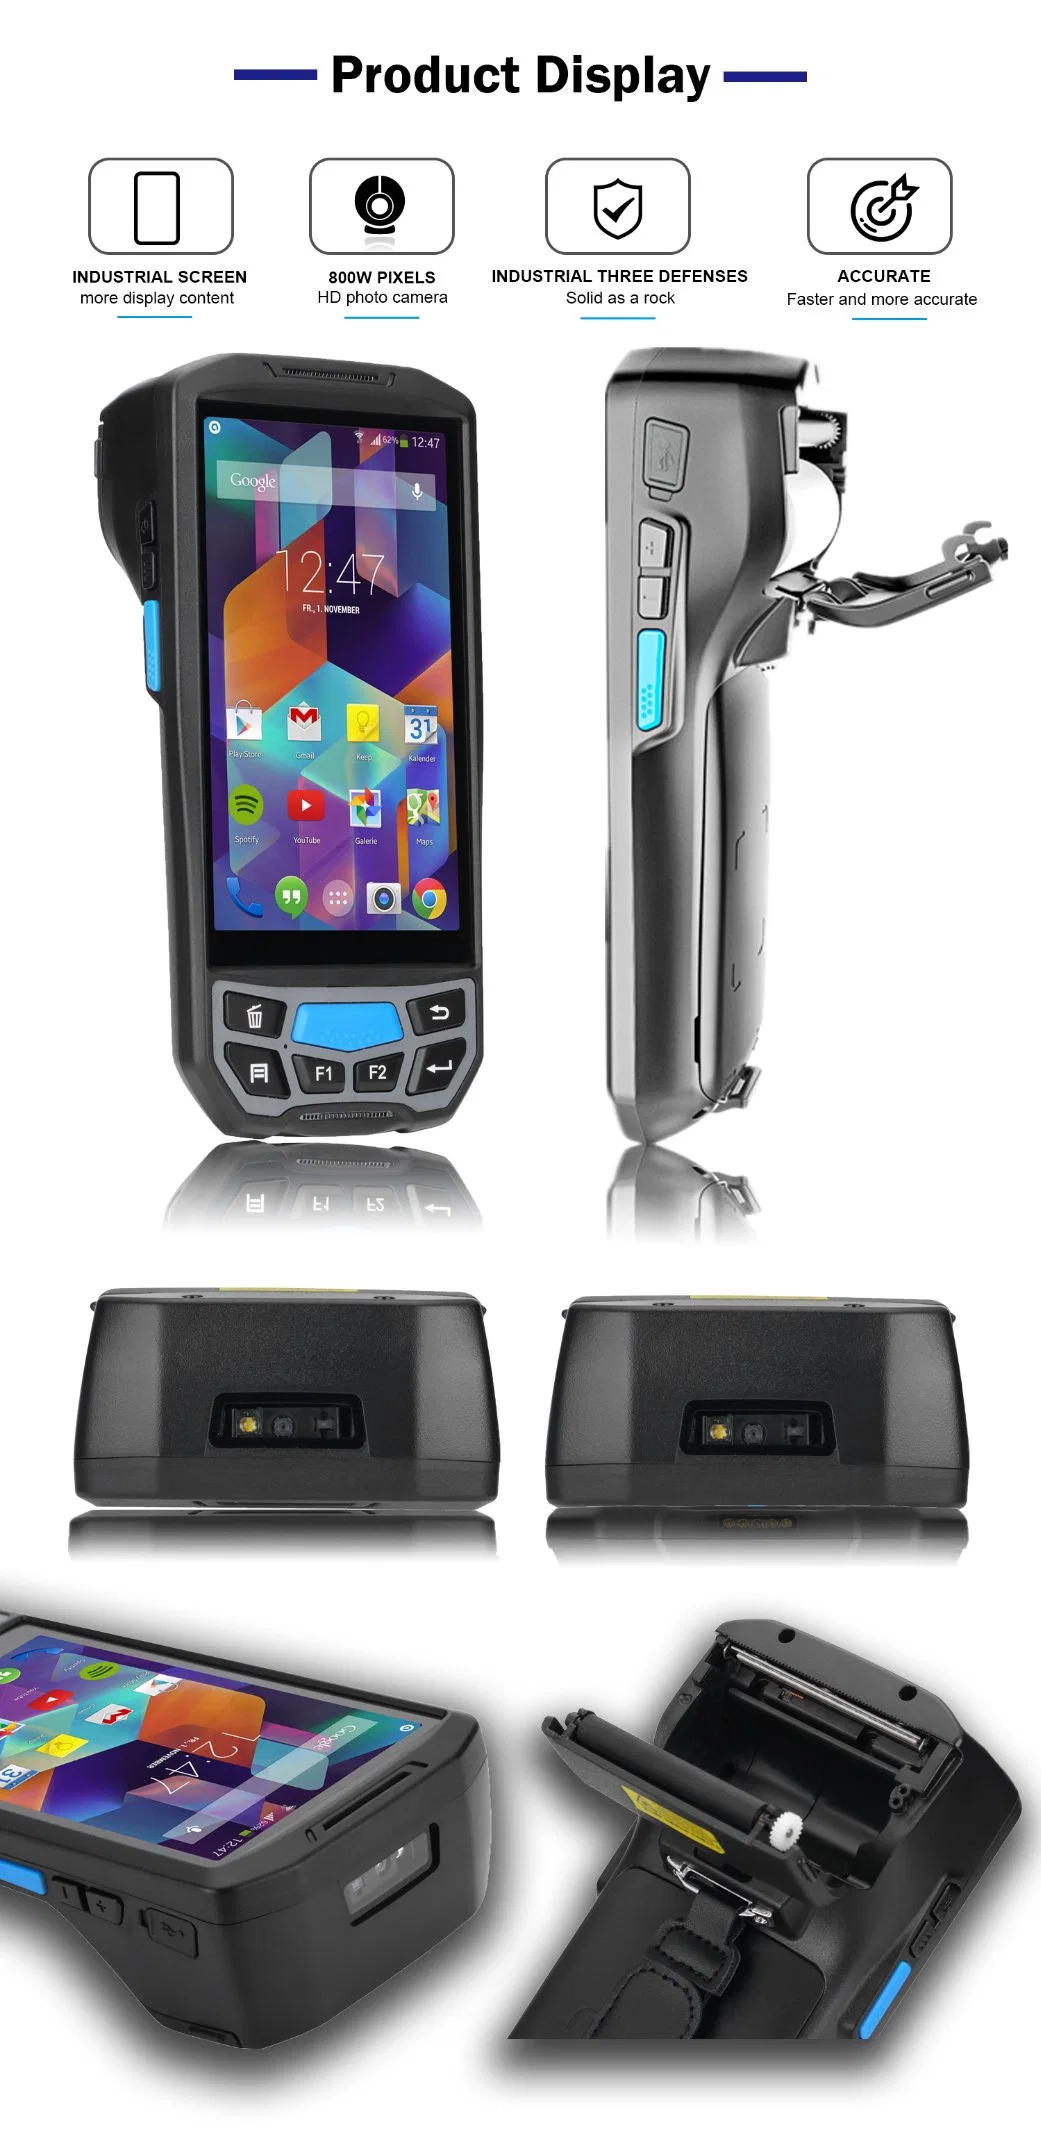 Rugged 4G Wireless Wearable Biometric Devices Price Cheap, Hand Held POS Terminal PDA Android Device with Barcode Scanner